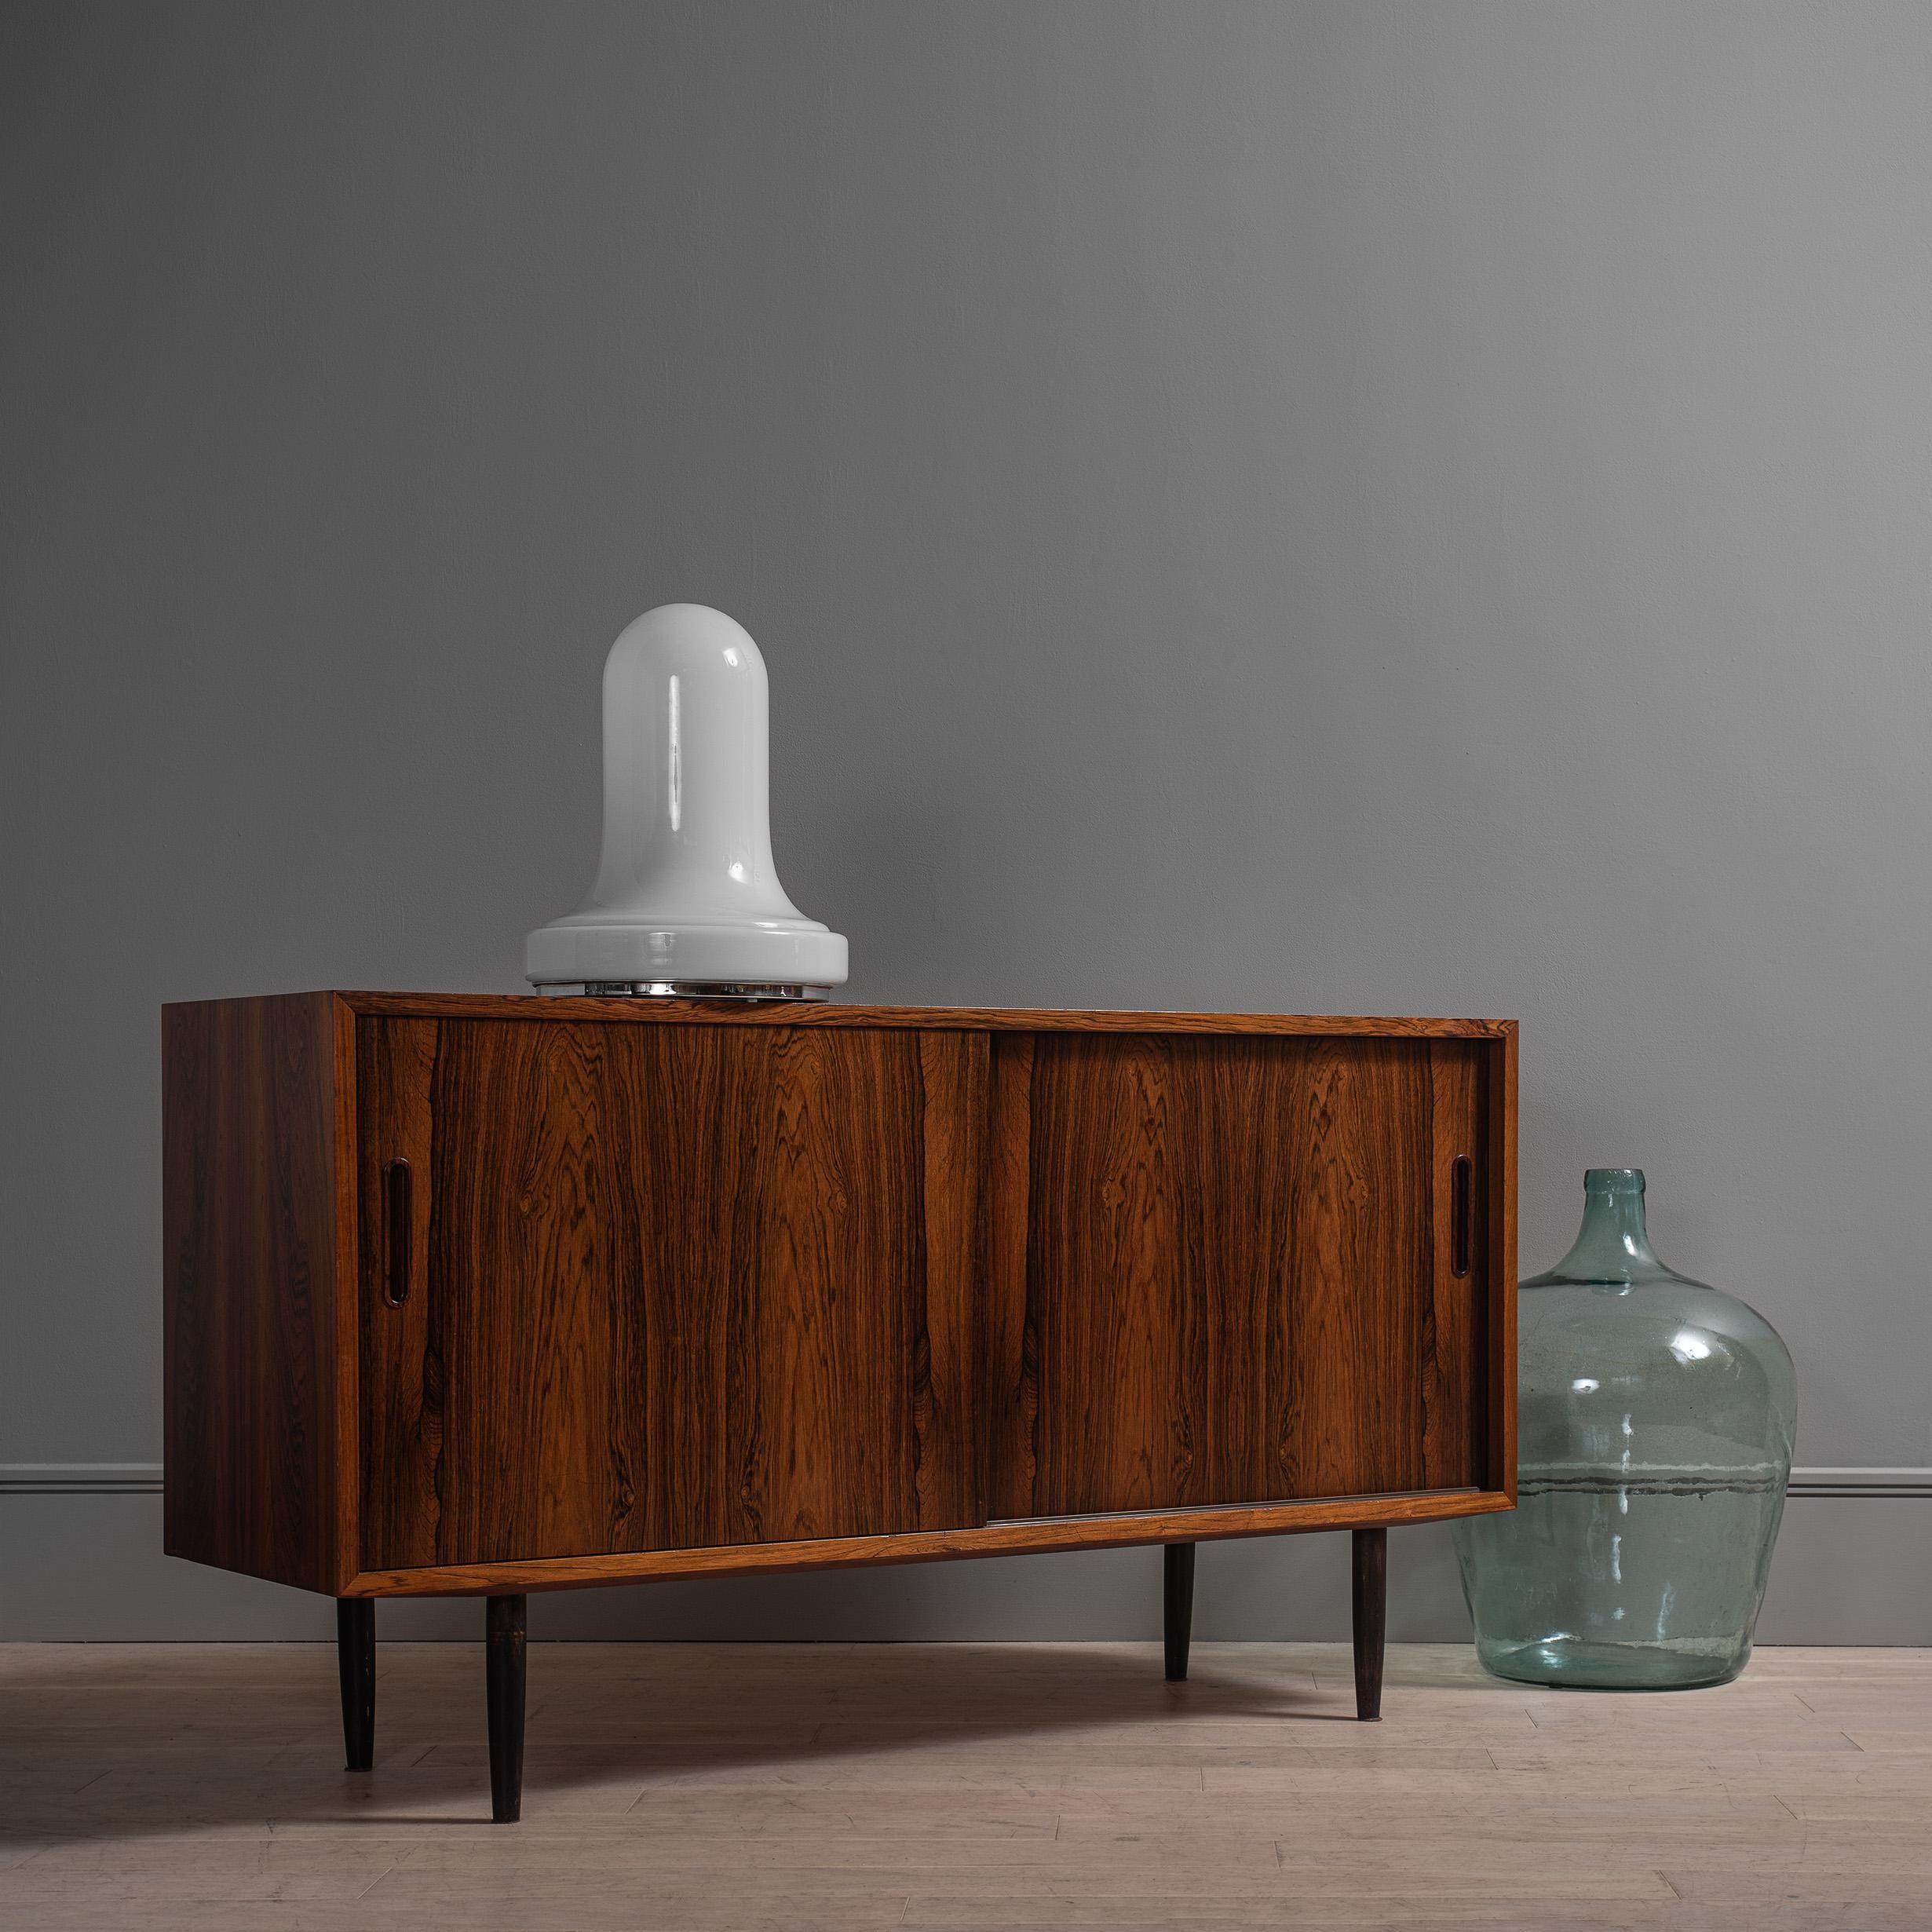 A beautifully sleek and practical credenza design from Poul Hundevad circa 1960. Height adjustable inner shelves and one small internal drawer.
